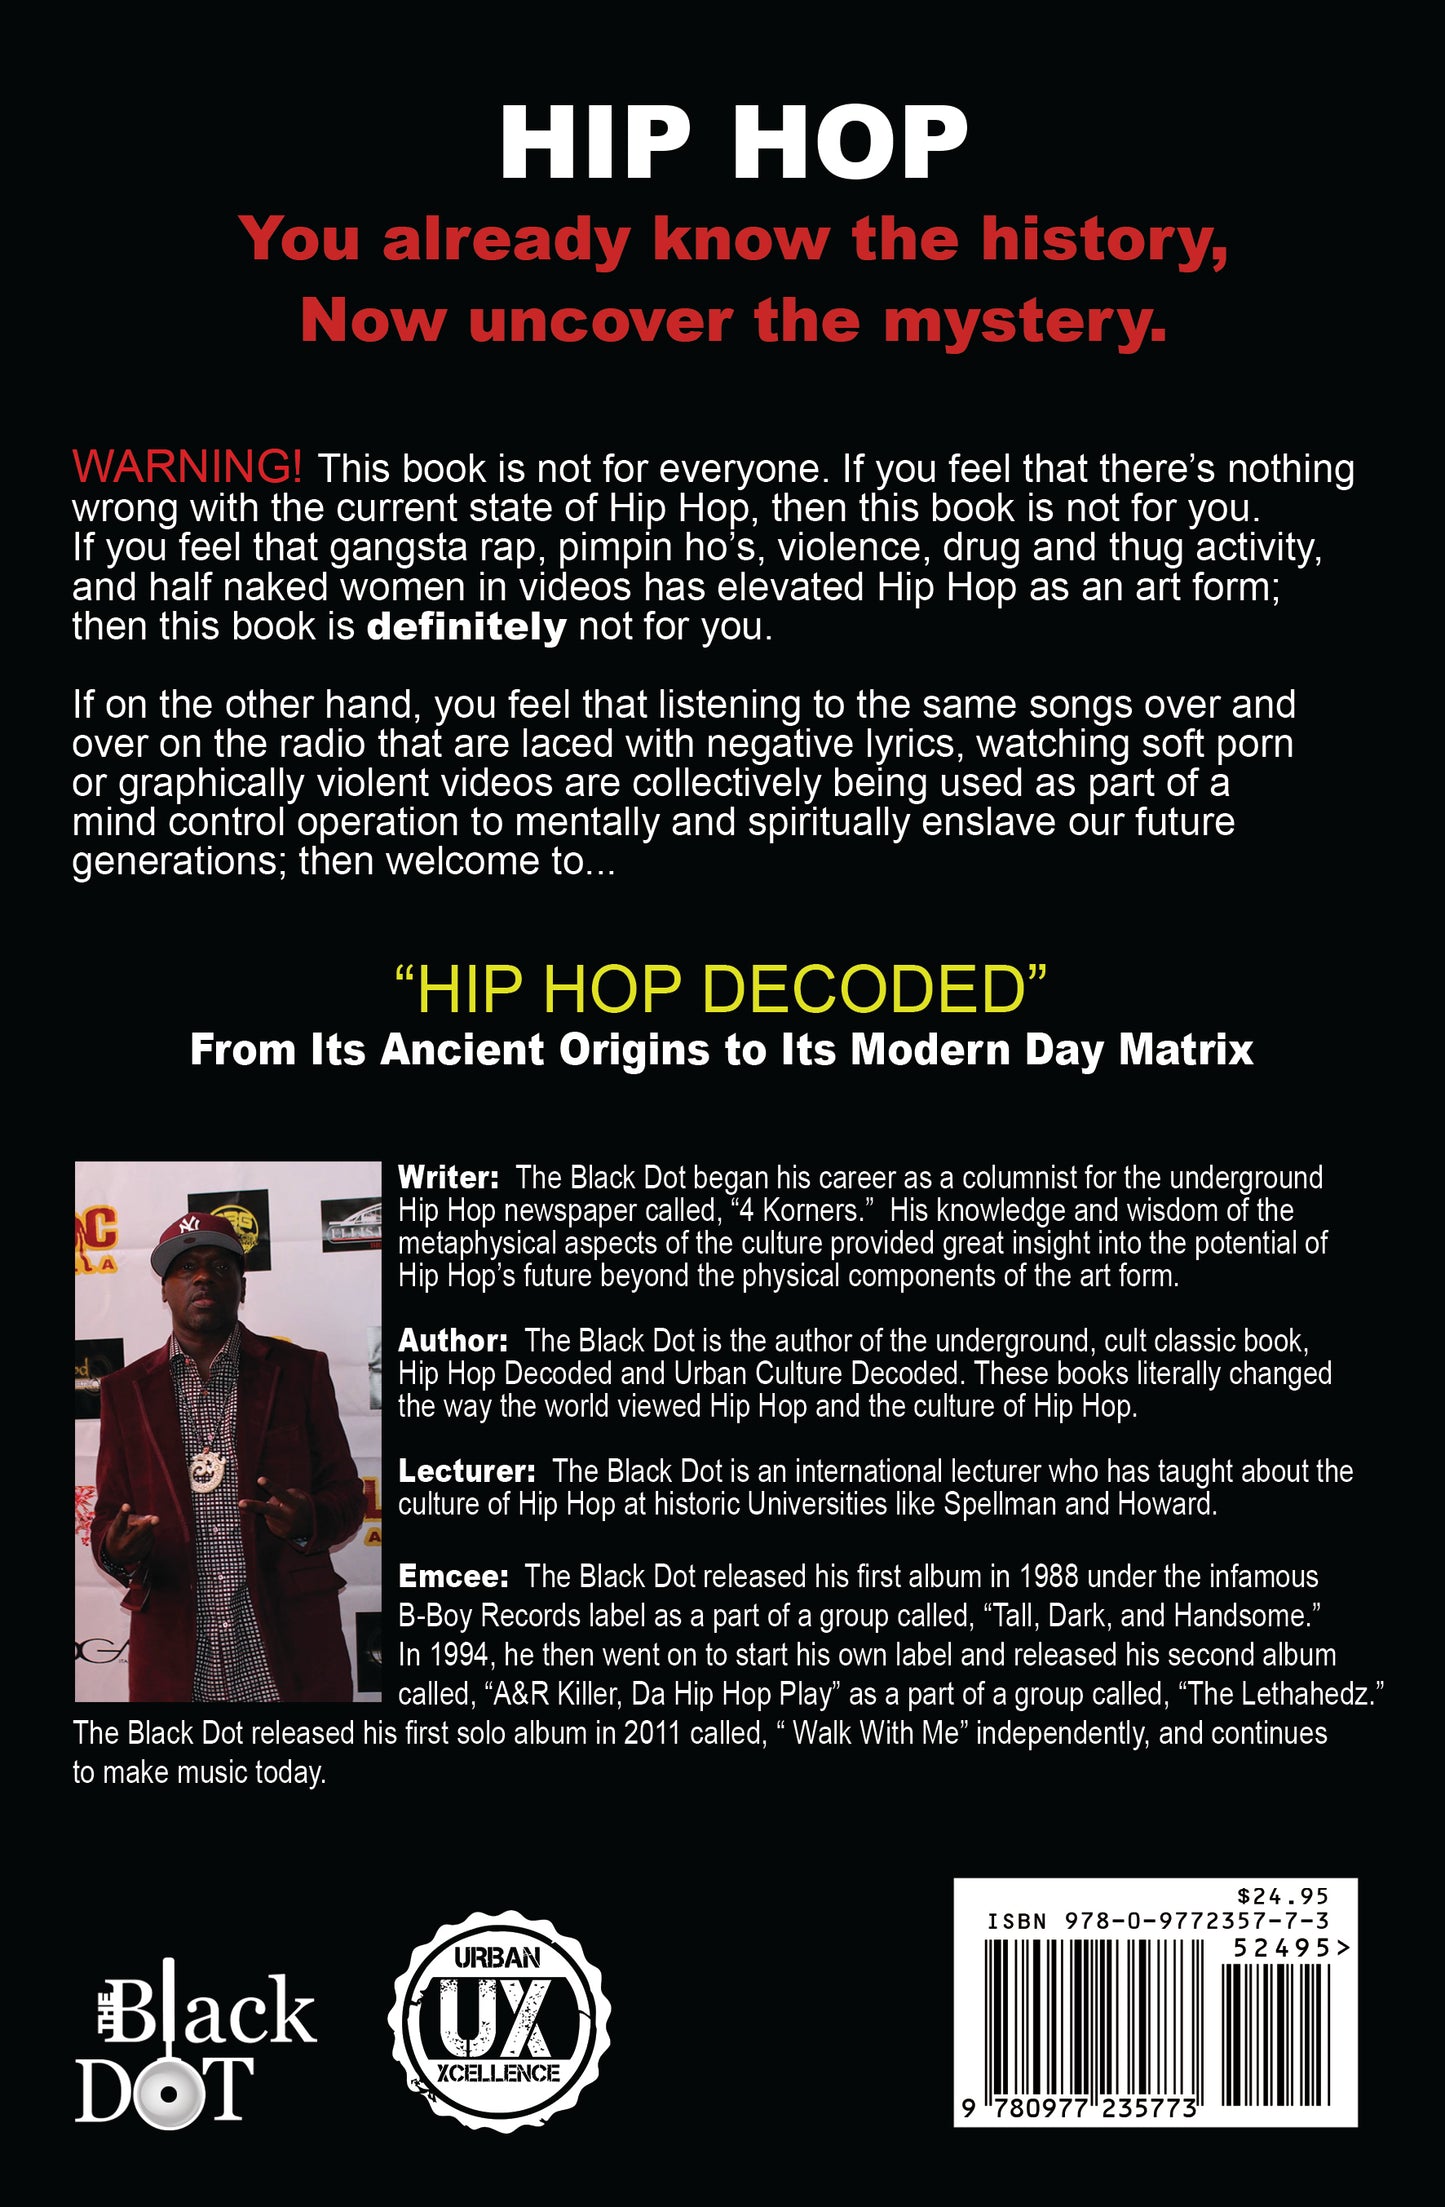 Book:  Hip Hop Decoded - Available on Amazon